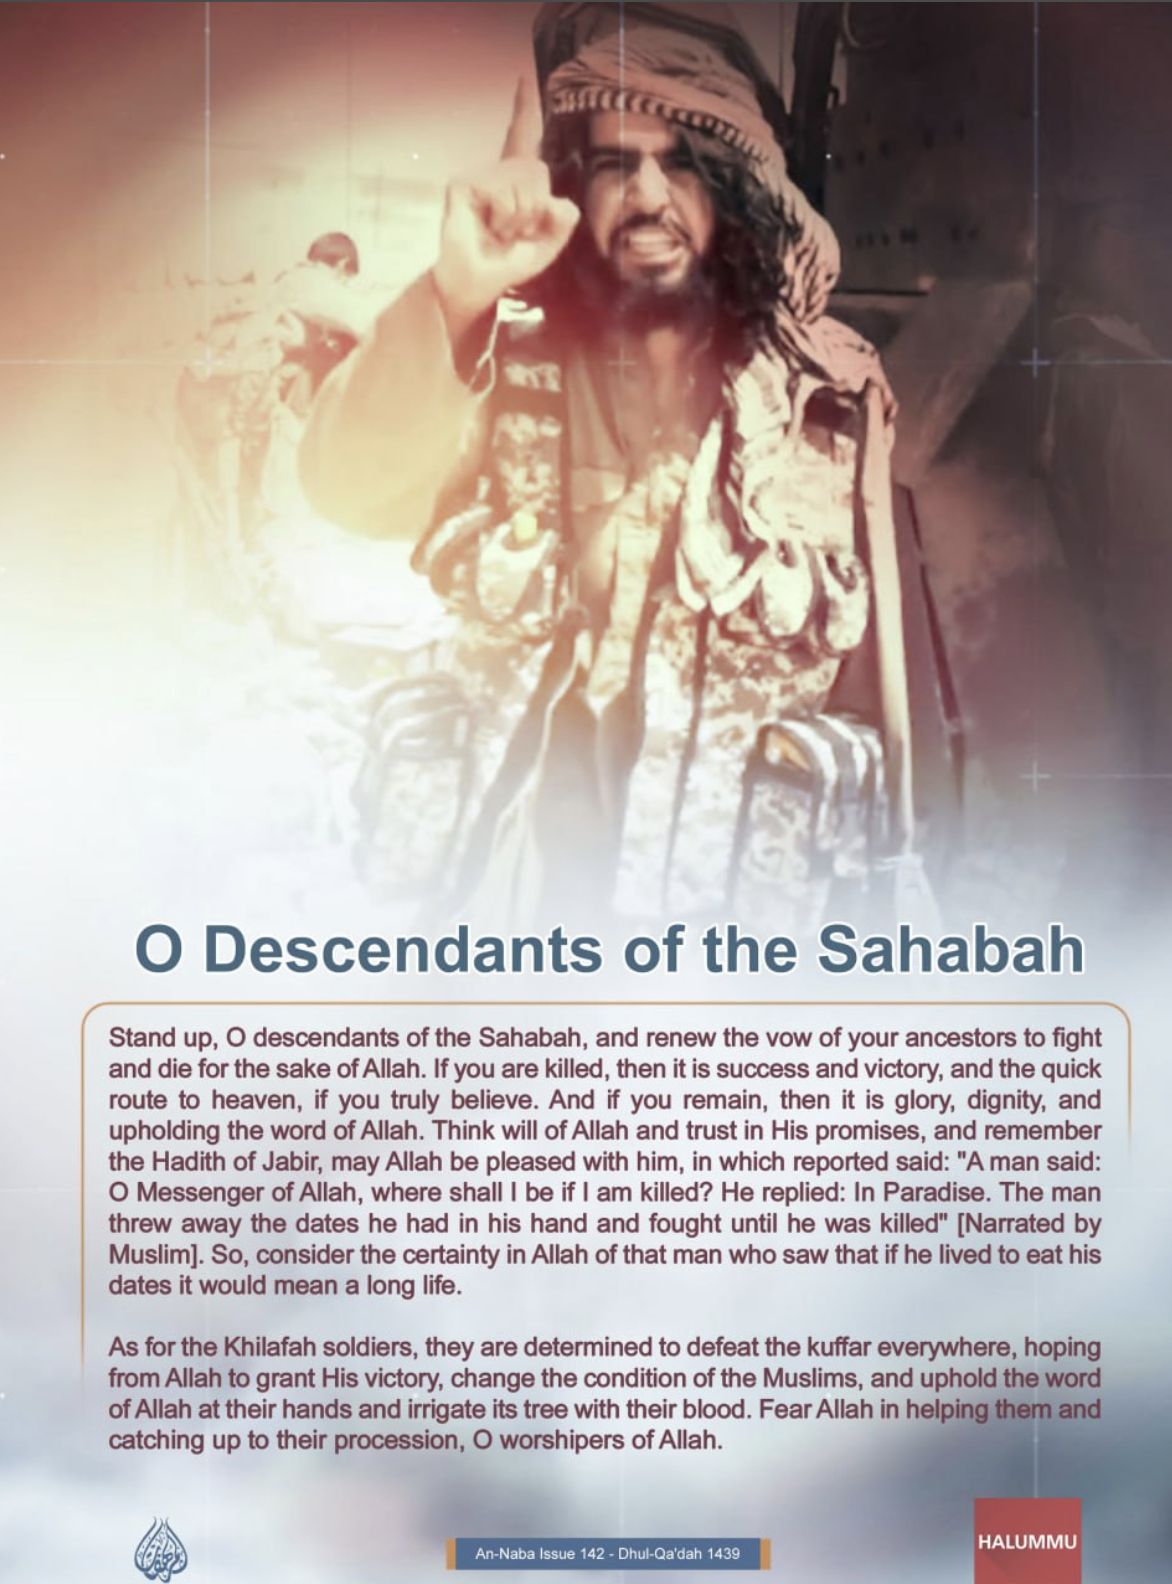 (Poster) Islamic State (IS) Insiders Recirculate a Poster Titled "O Descendants of Sahabah" in English - 23 May 2023